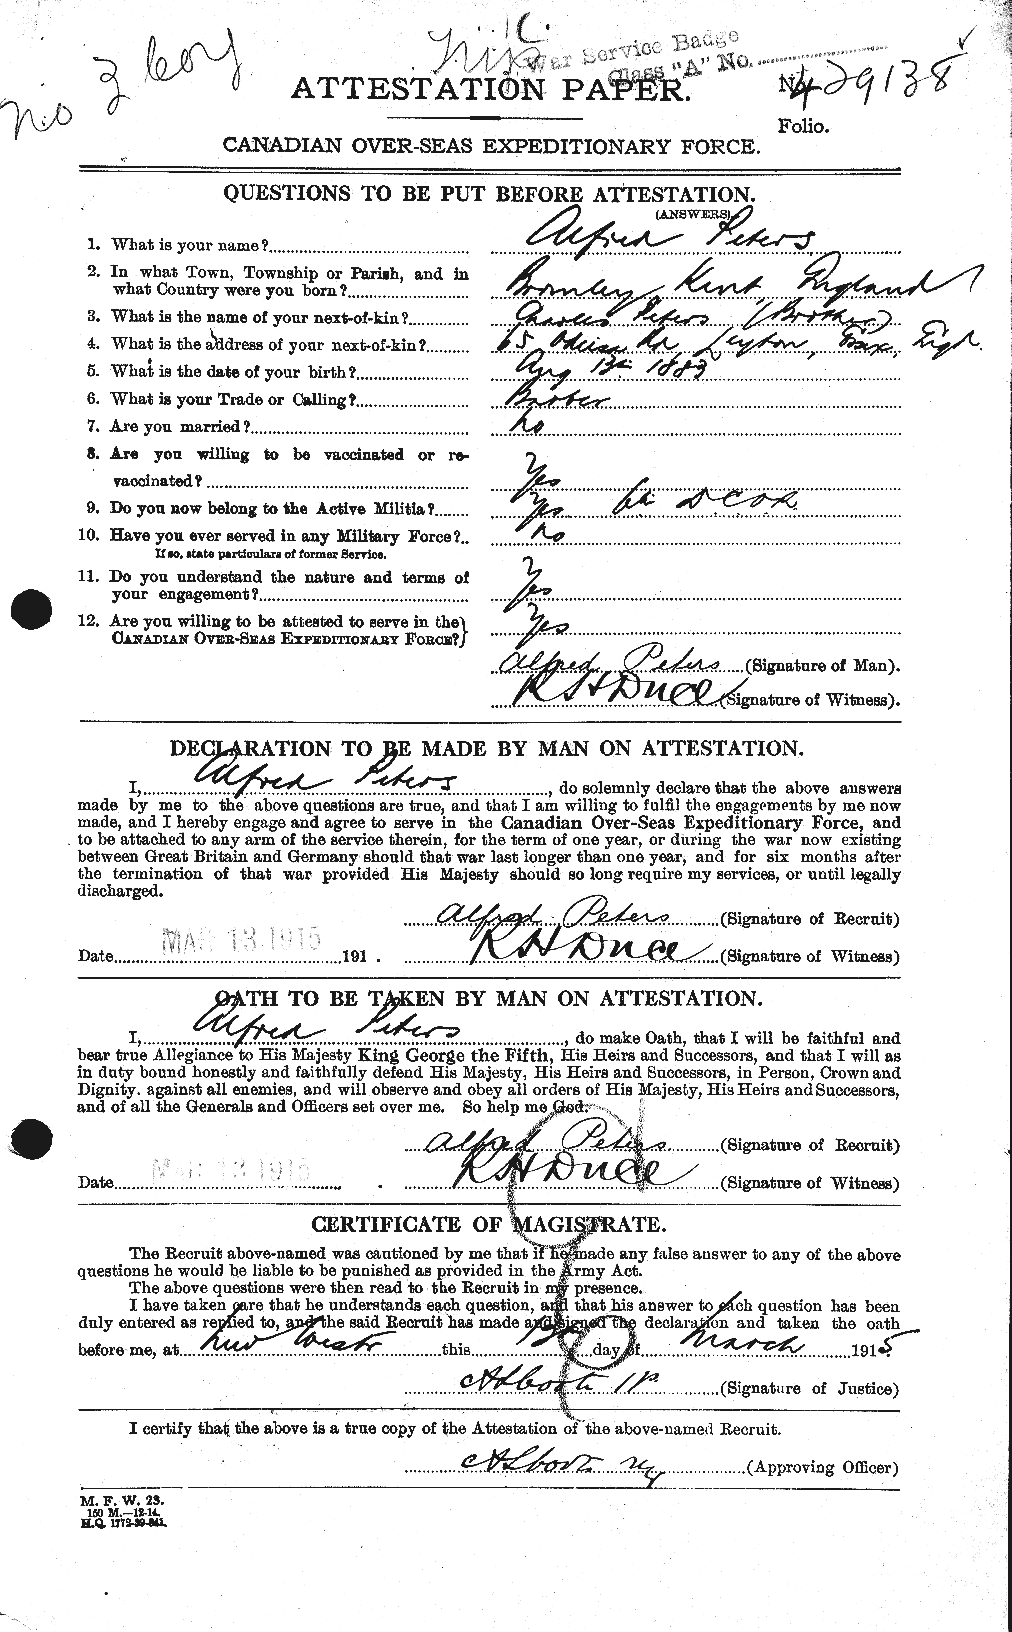 Personnel Records of the First World War - CEF 575333a